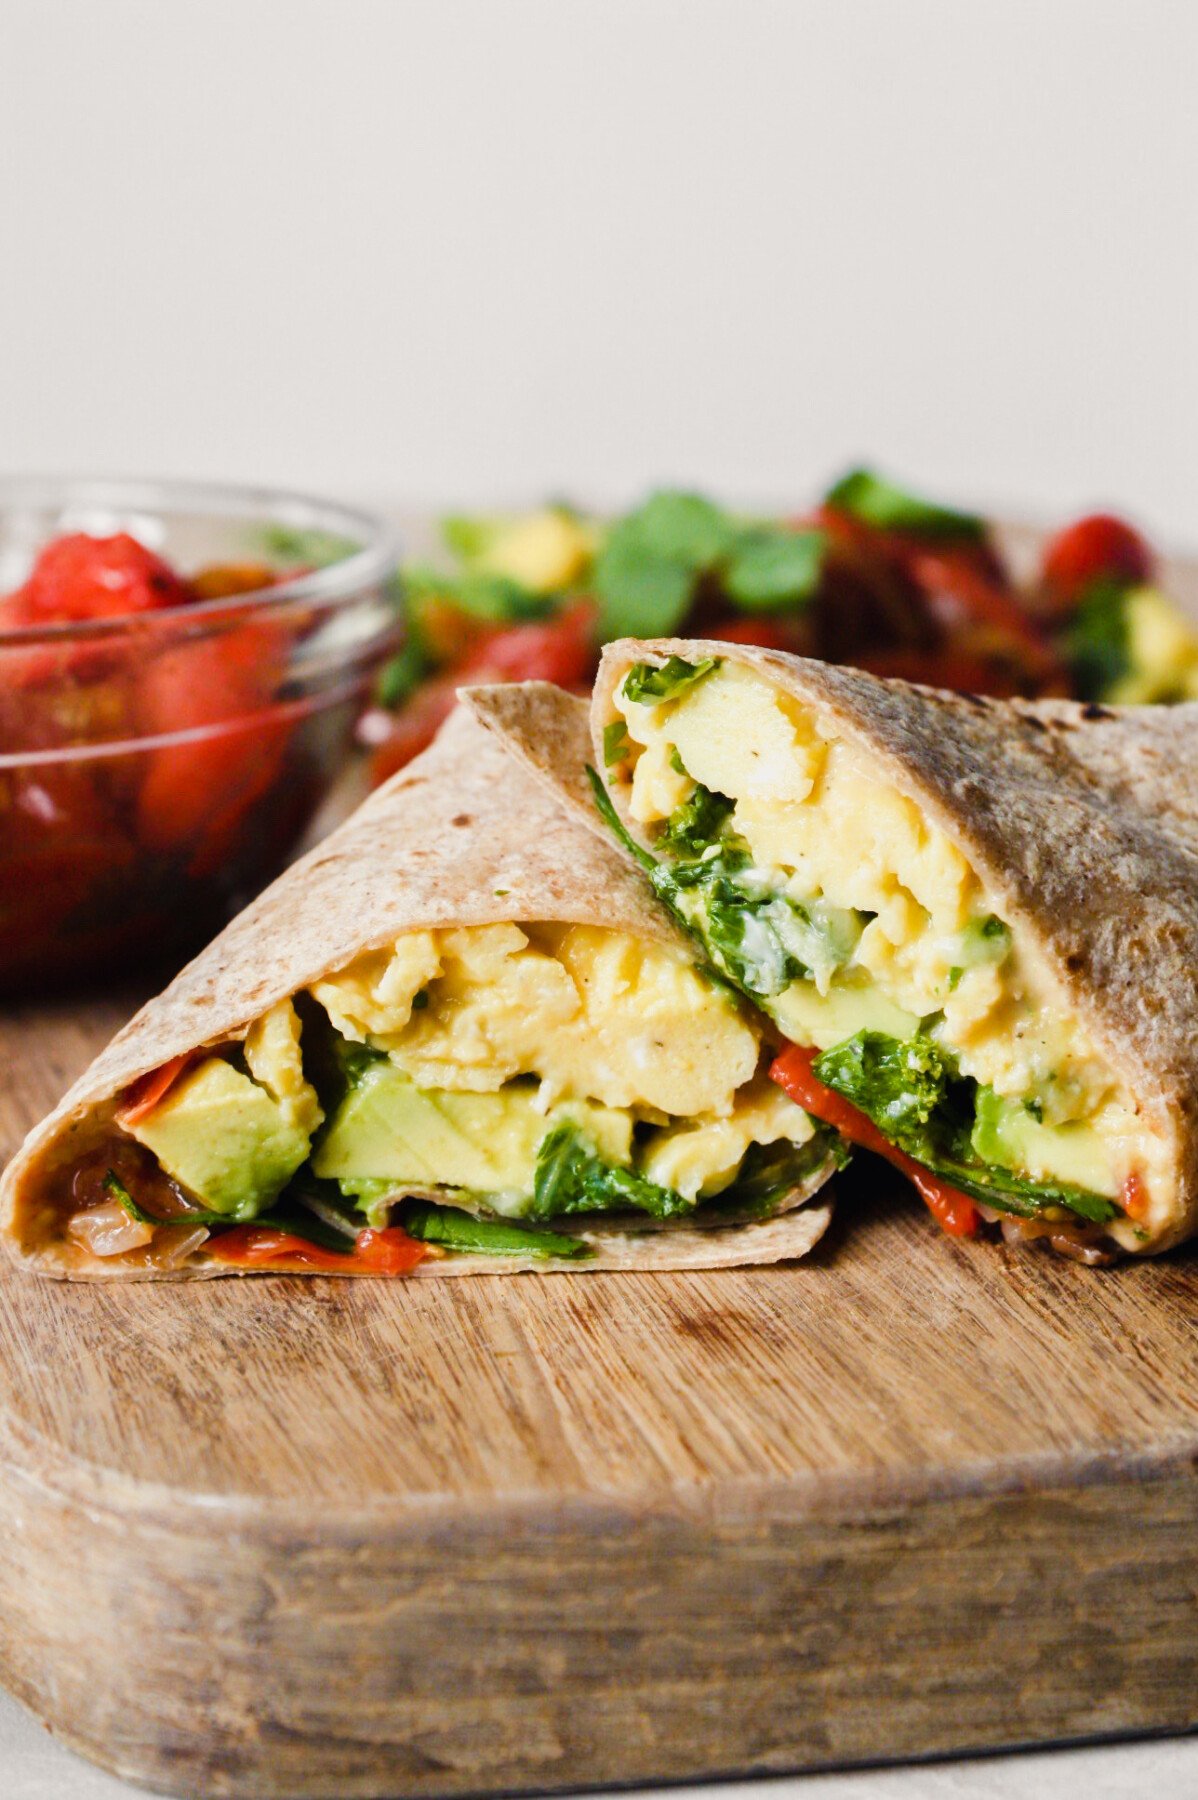 Photograph of a breakfast burrito on a wood cutting board